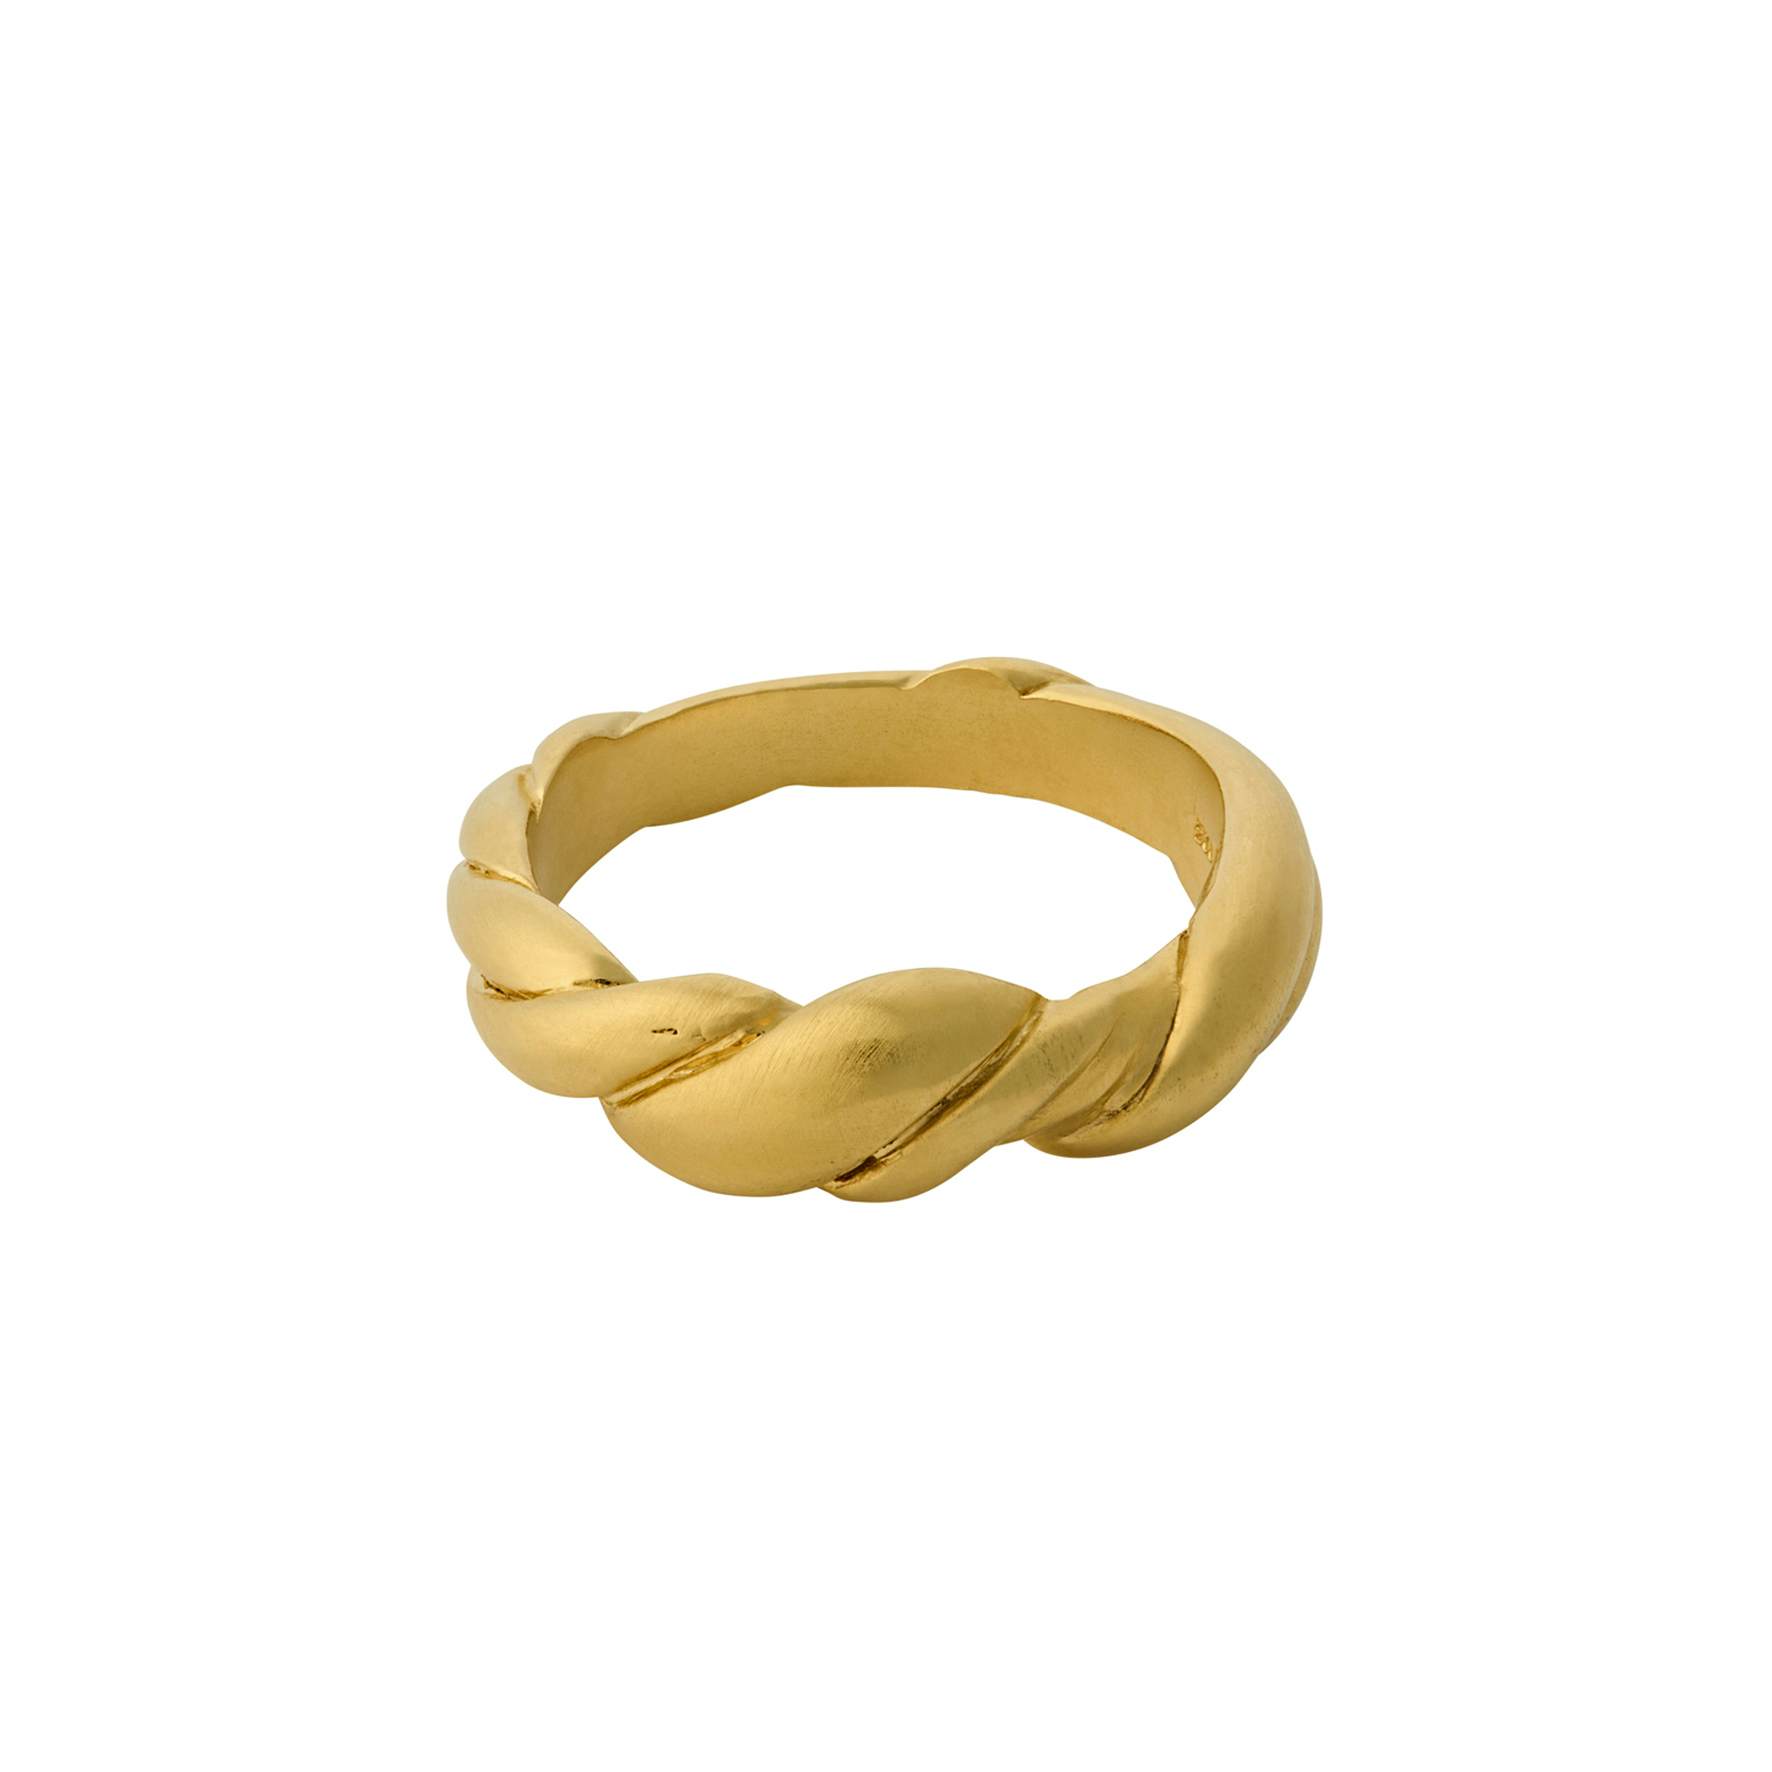 Hana Ring from Pernille Corydon in Goldplated-Silver Sterling 925